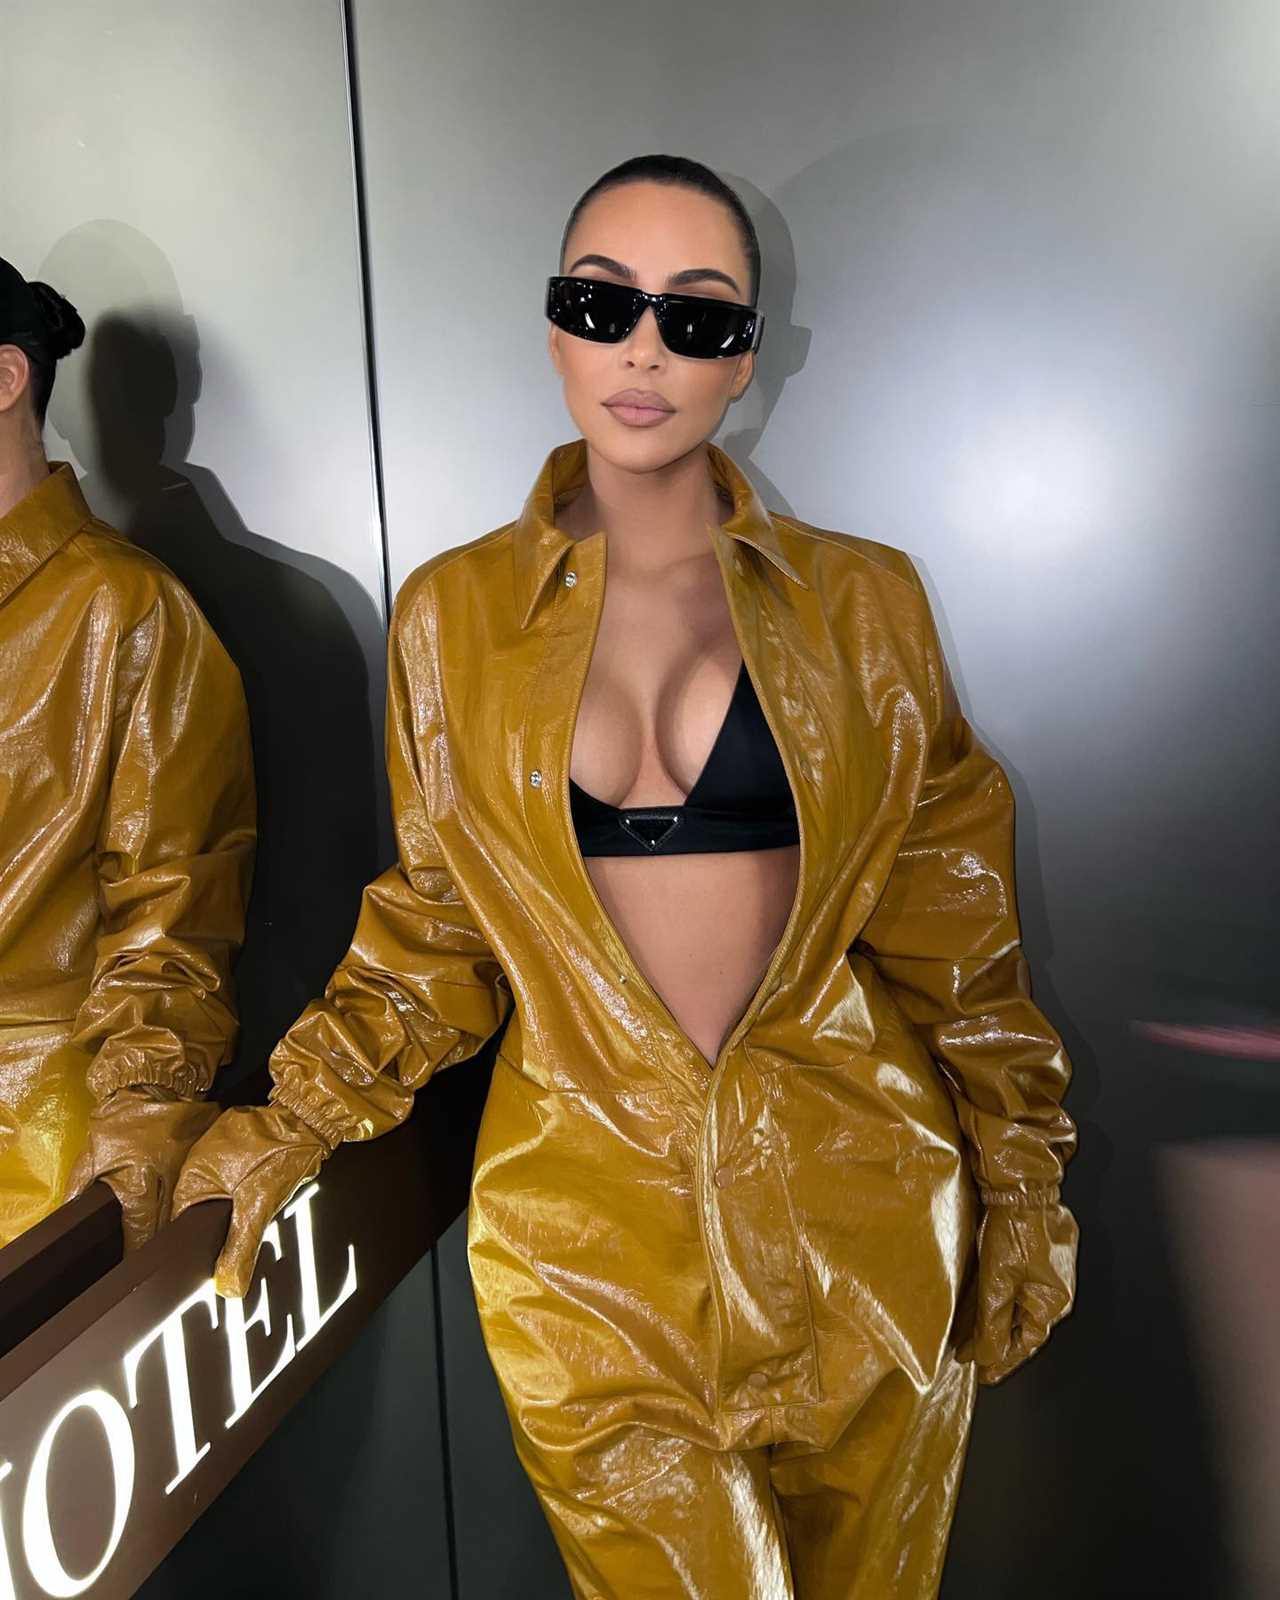 Kim Kardashian is selling her used $6K jacket to fans weeks after star was slammed for ‘not giving money to charity’